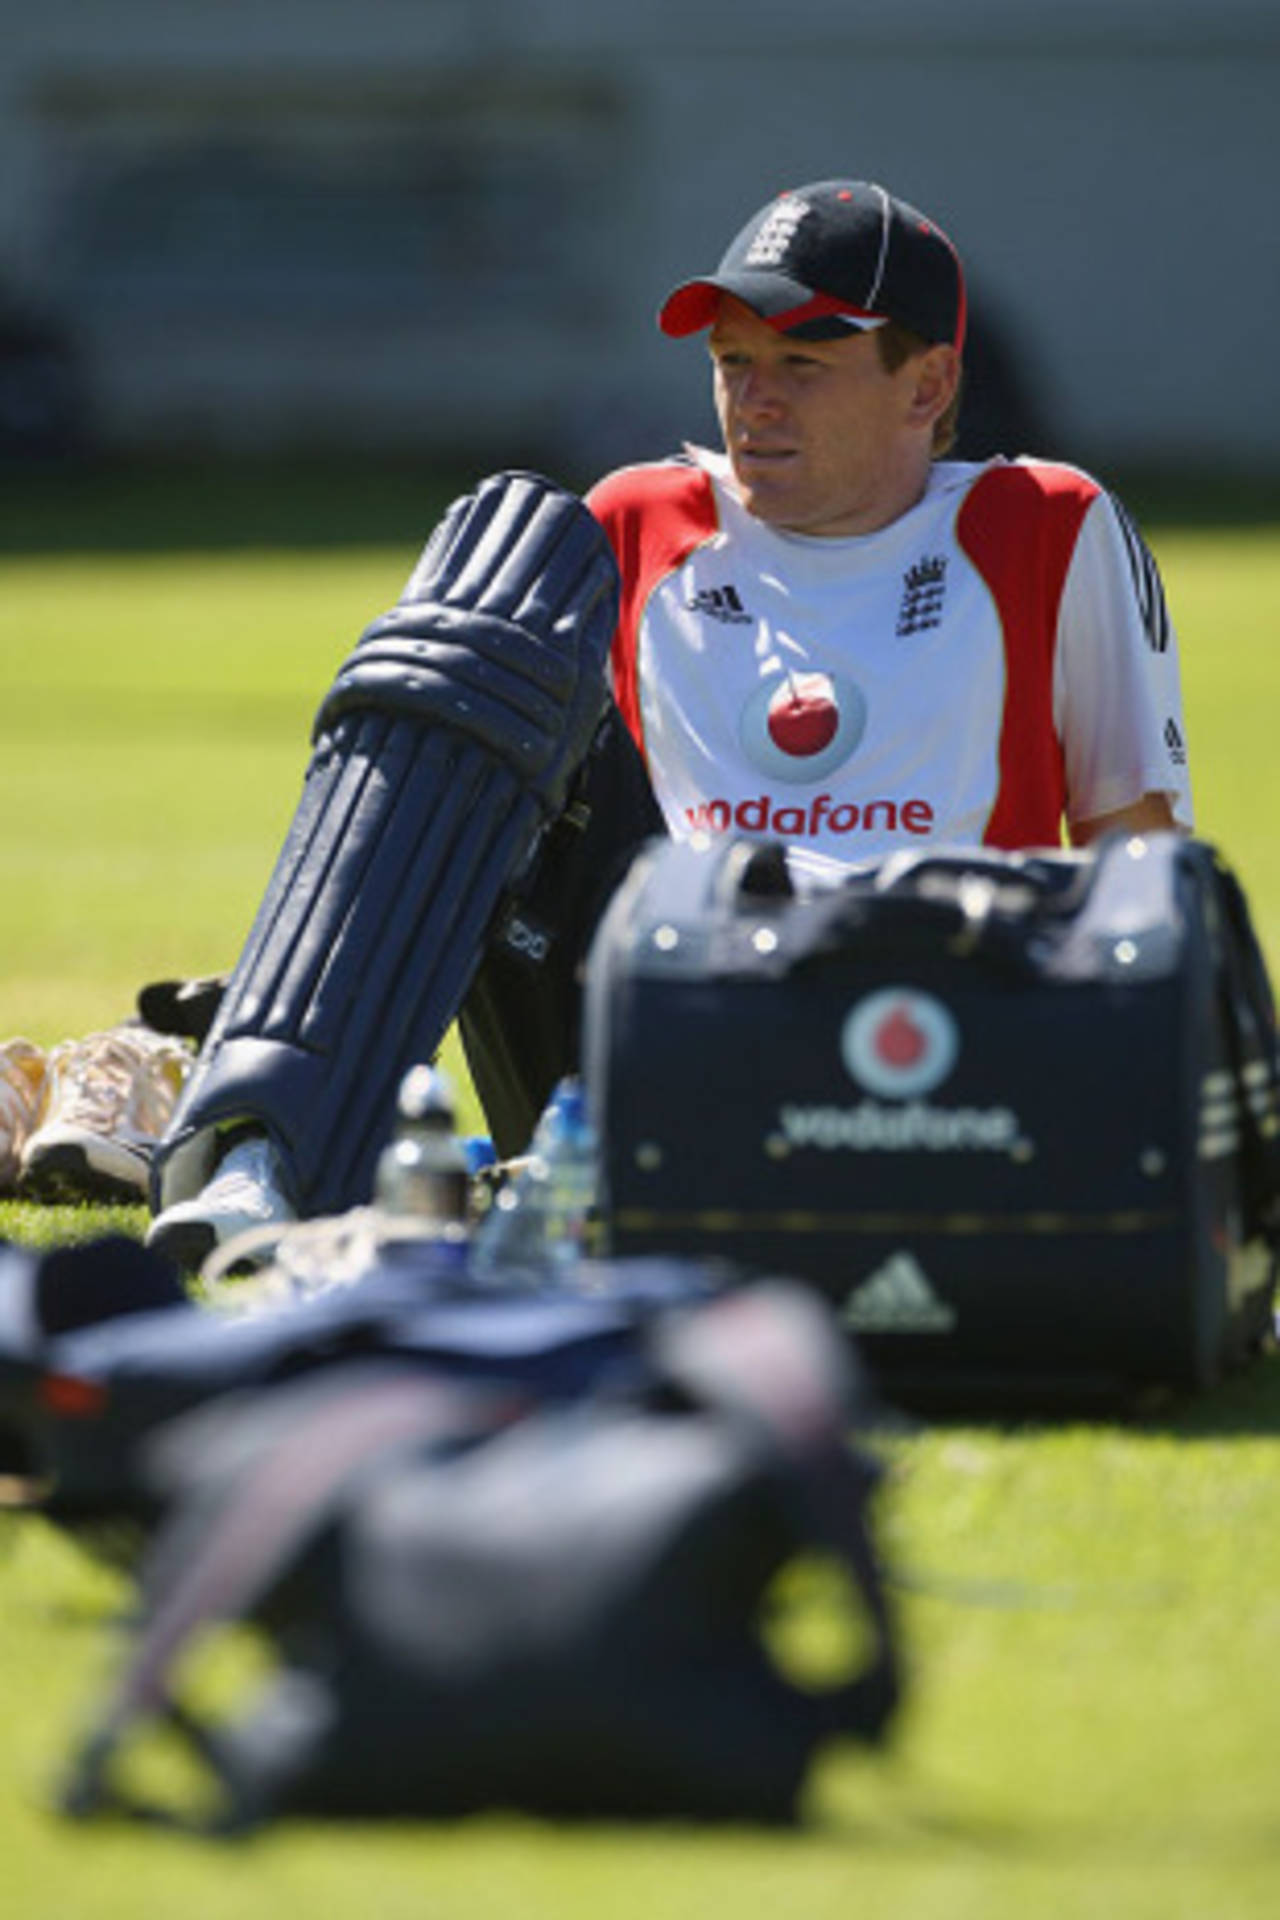 Eoin Morgan takes a breather during England's training session, South Africa v England, 3rd ODI, Cape Town, November 26, 2009